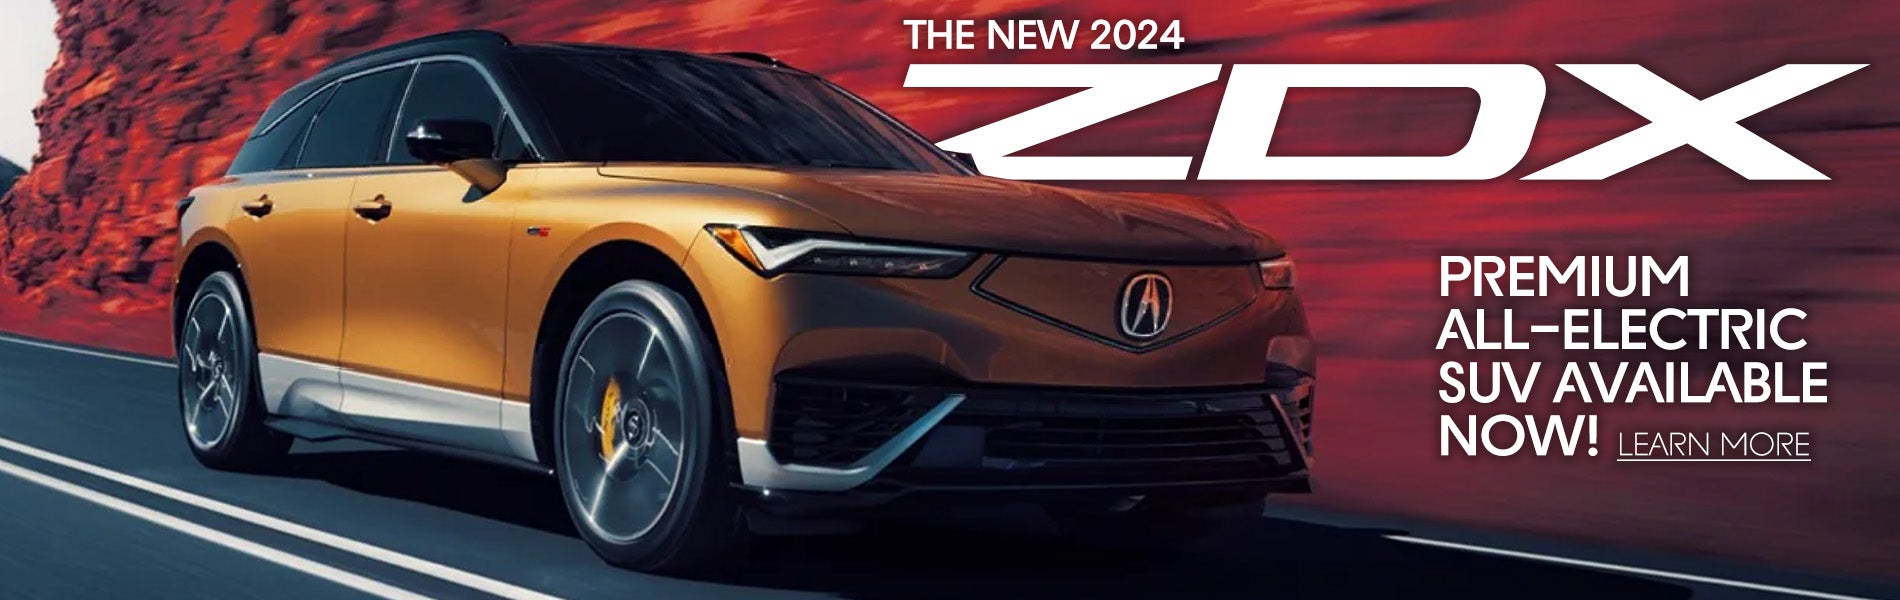 The New 2024 ZDX